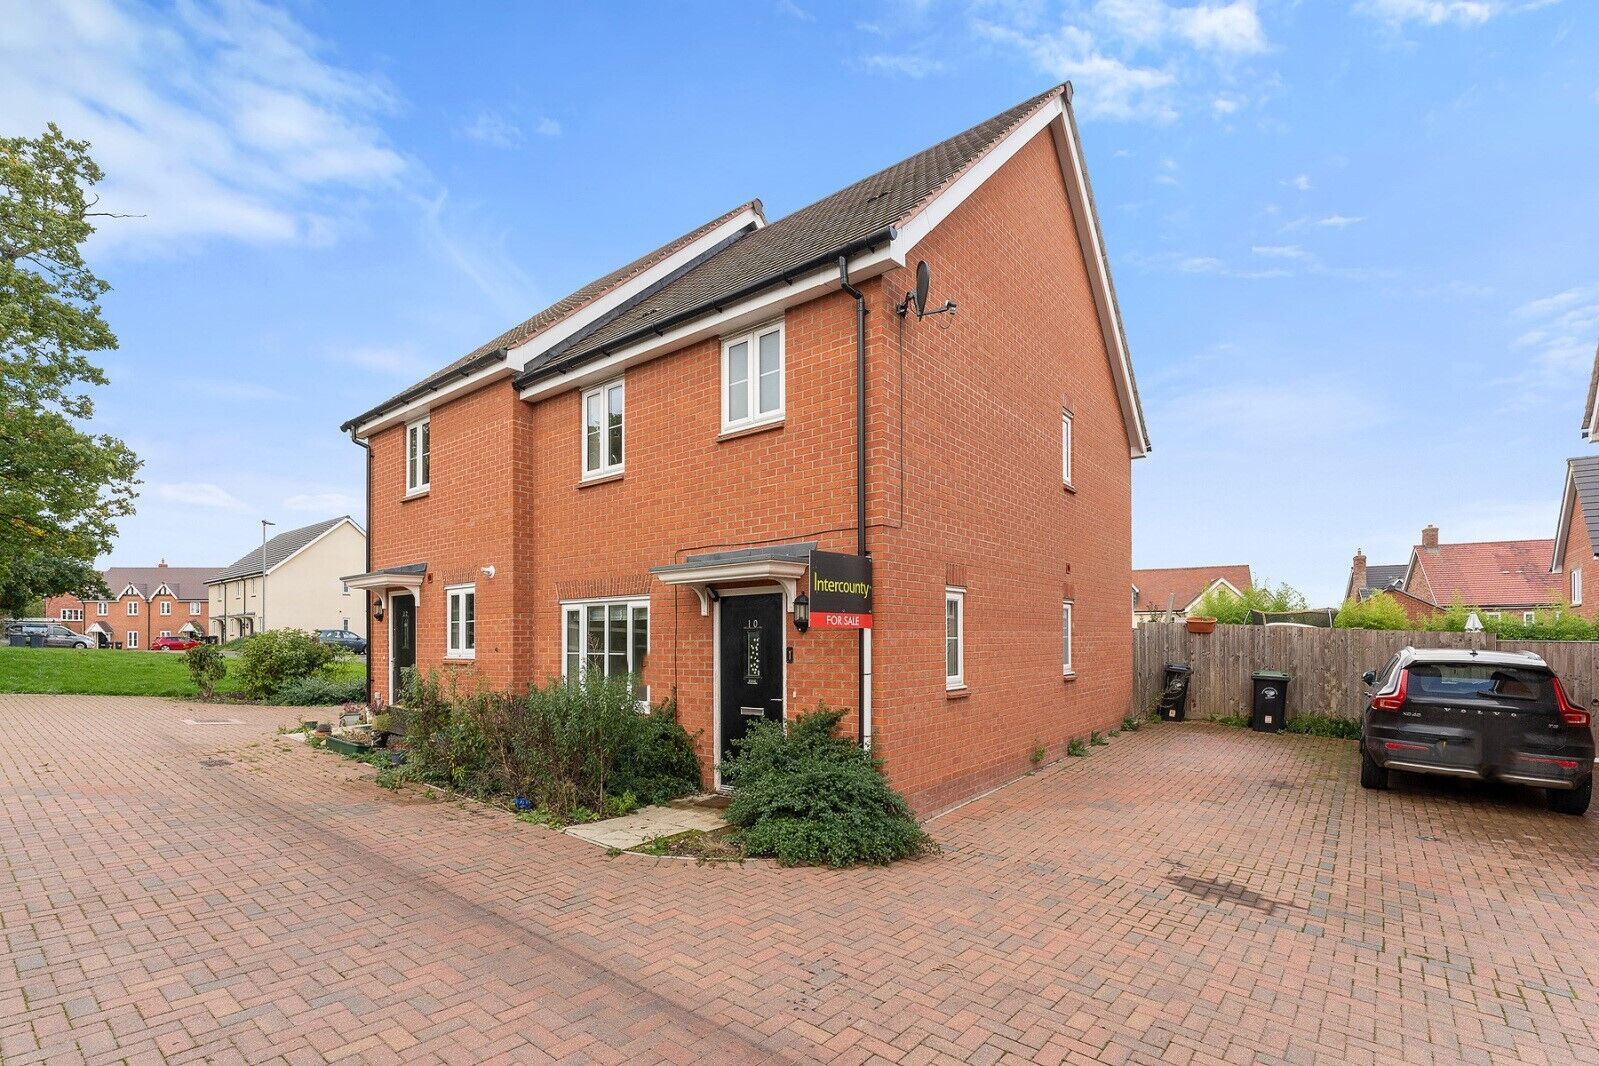 3 bedroom semi detached house for sale Bugle Close, Stansted, CM24, main image